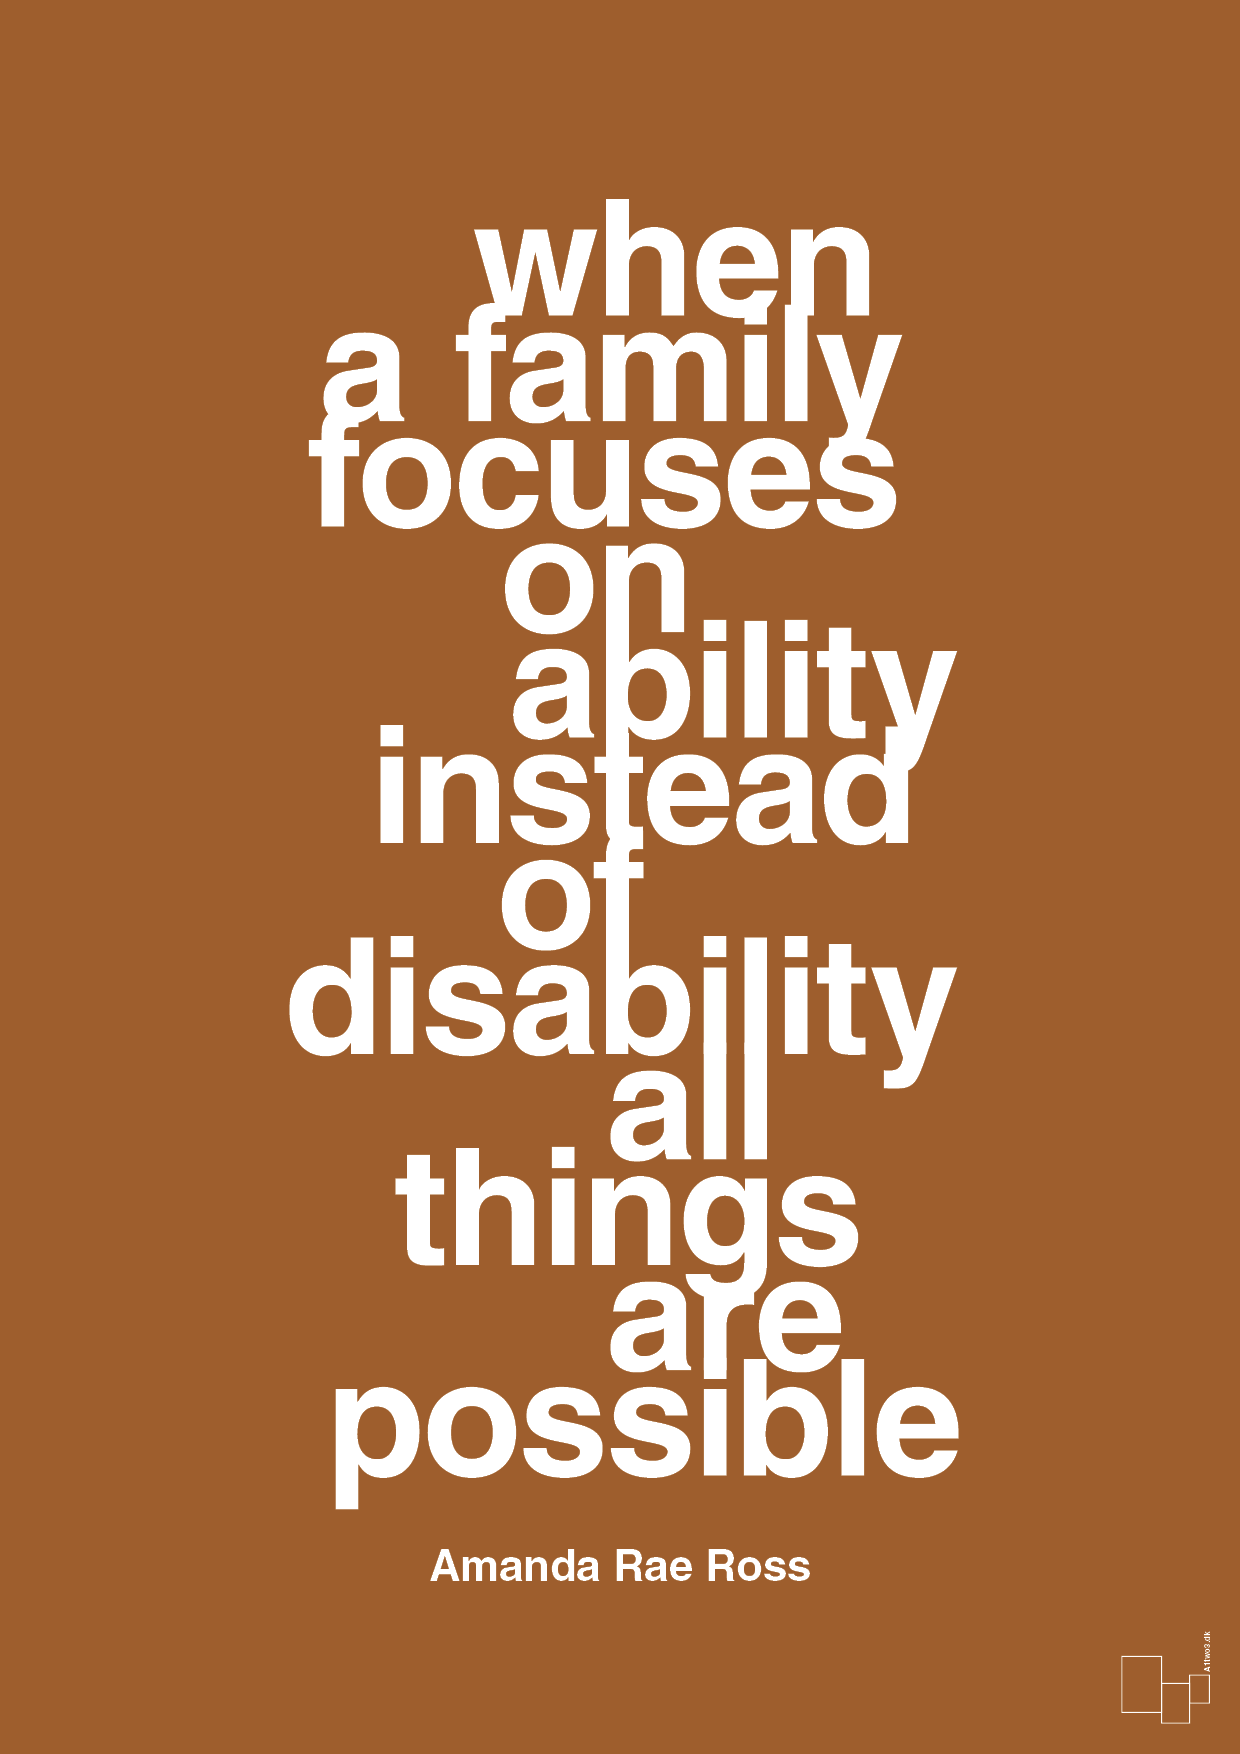 when a family focuses on ability instead of disability all things are possible - Plakat med Samfund i Cognac